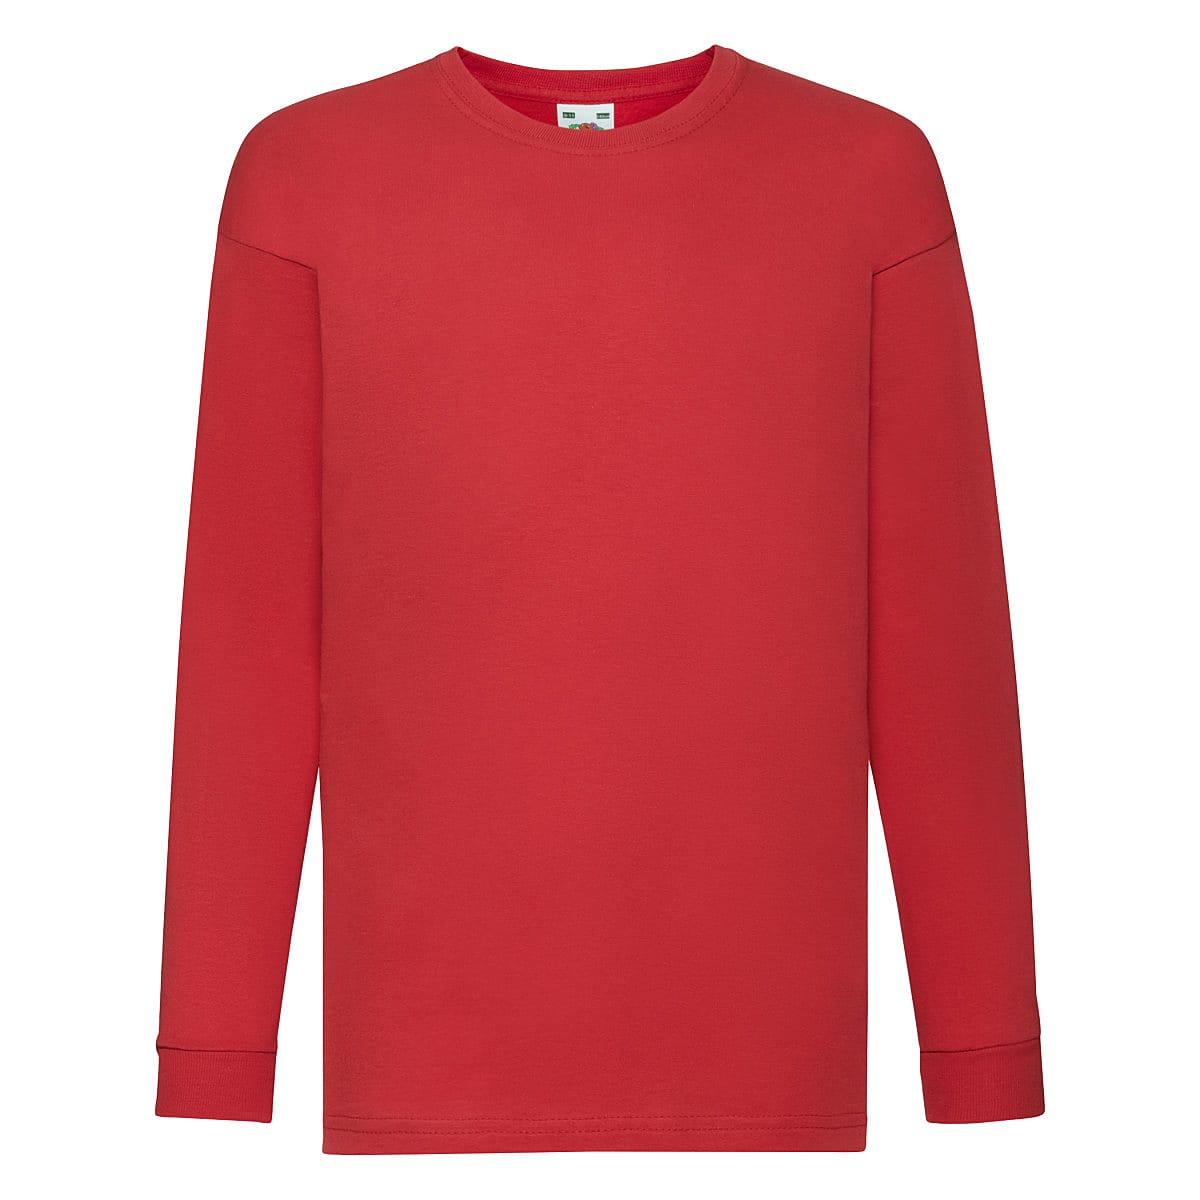 Fruit Of The Loom Childrens Valuweight Long-Sleeve T-Shirt in Red (Product Code: 61007)